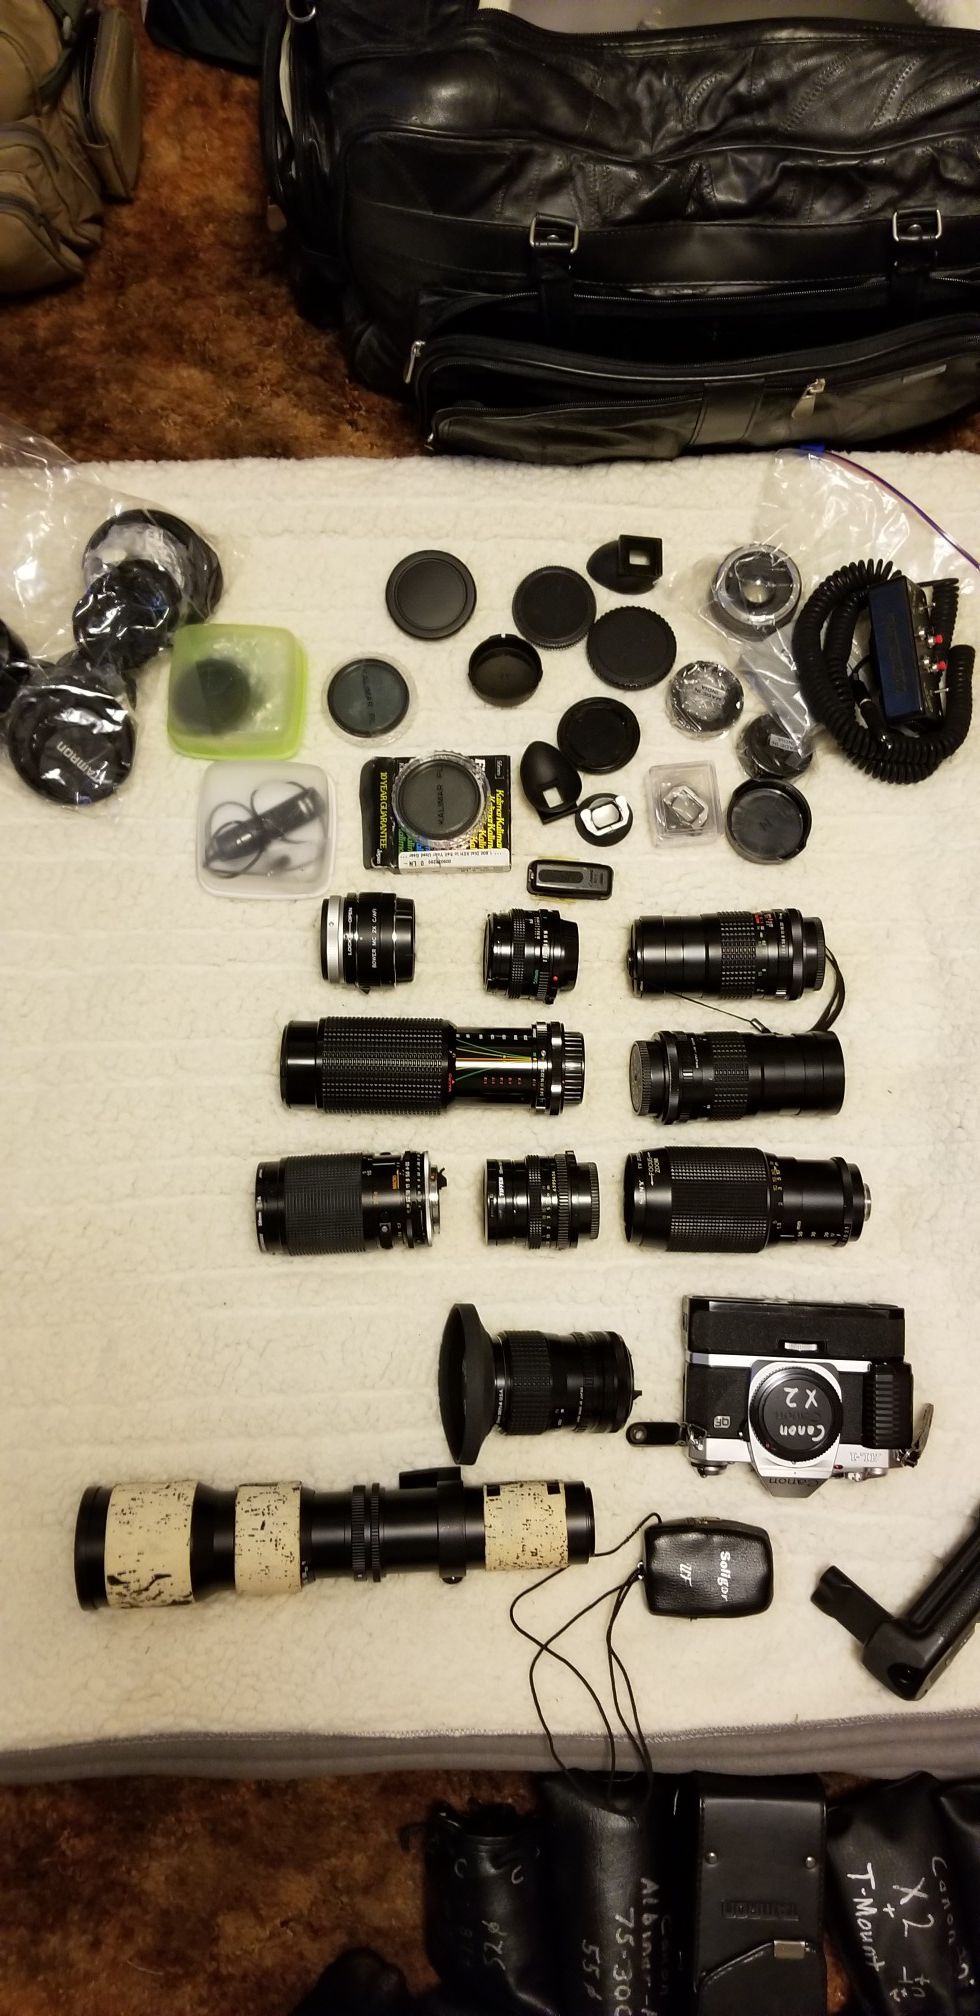 Vintage canon and minolta cameras and lenses/accessories